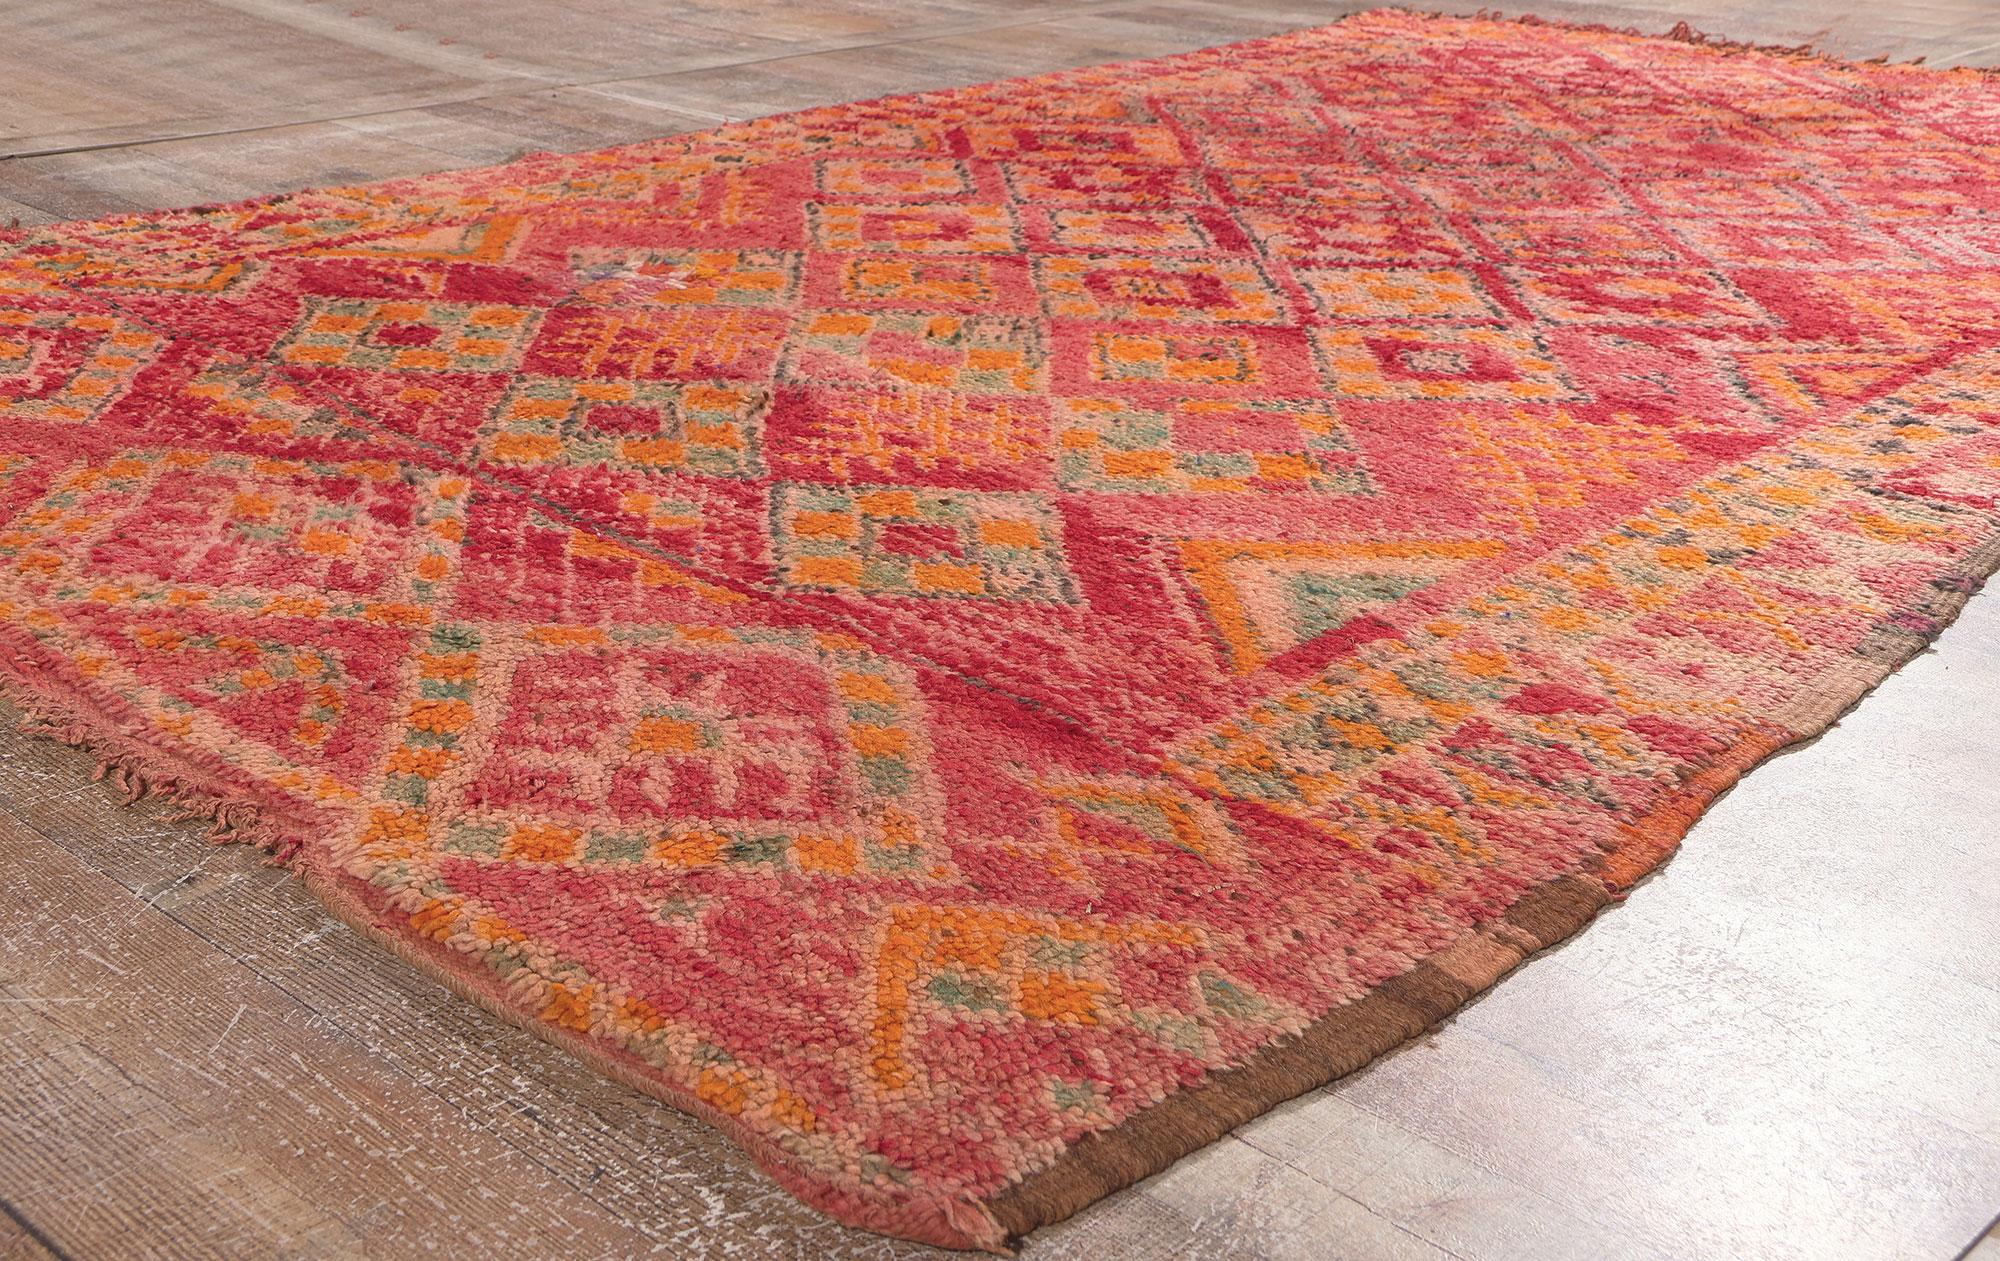 Vintage Talsint Moroccan Rug, Boho Jungalow Meets Nomadic Charm In Good Condition For Sale In Dallas, TX